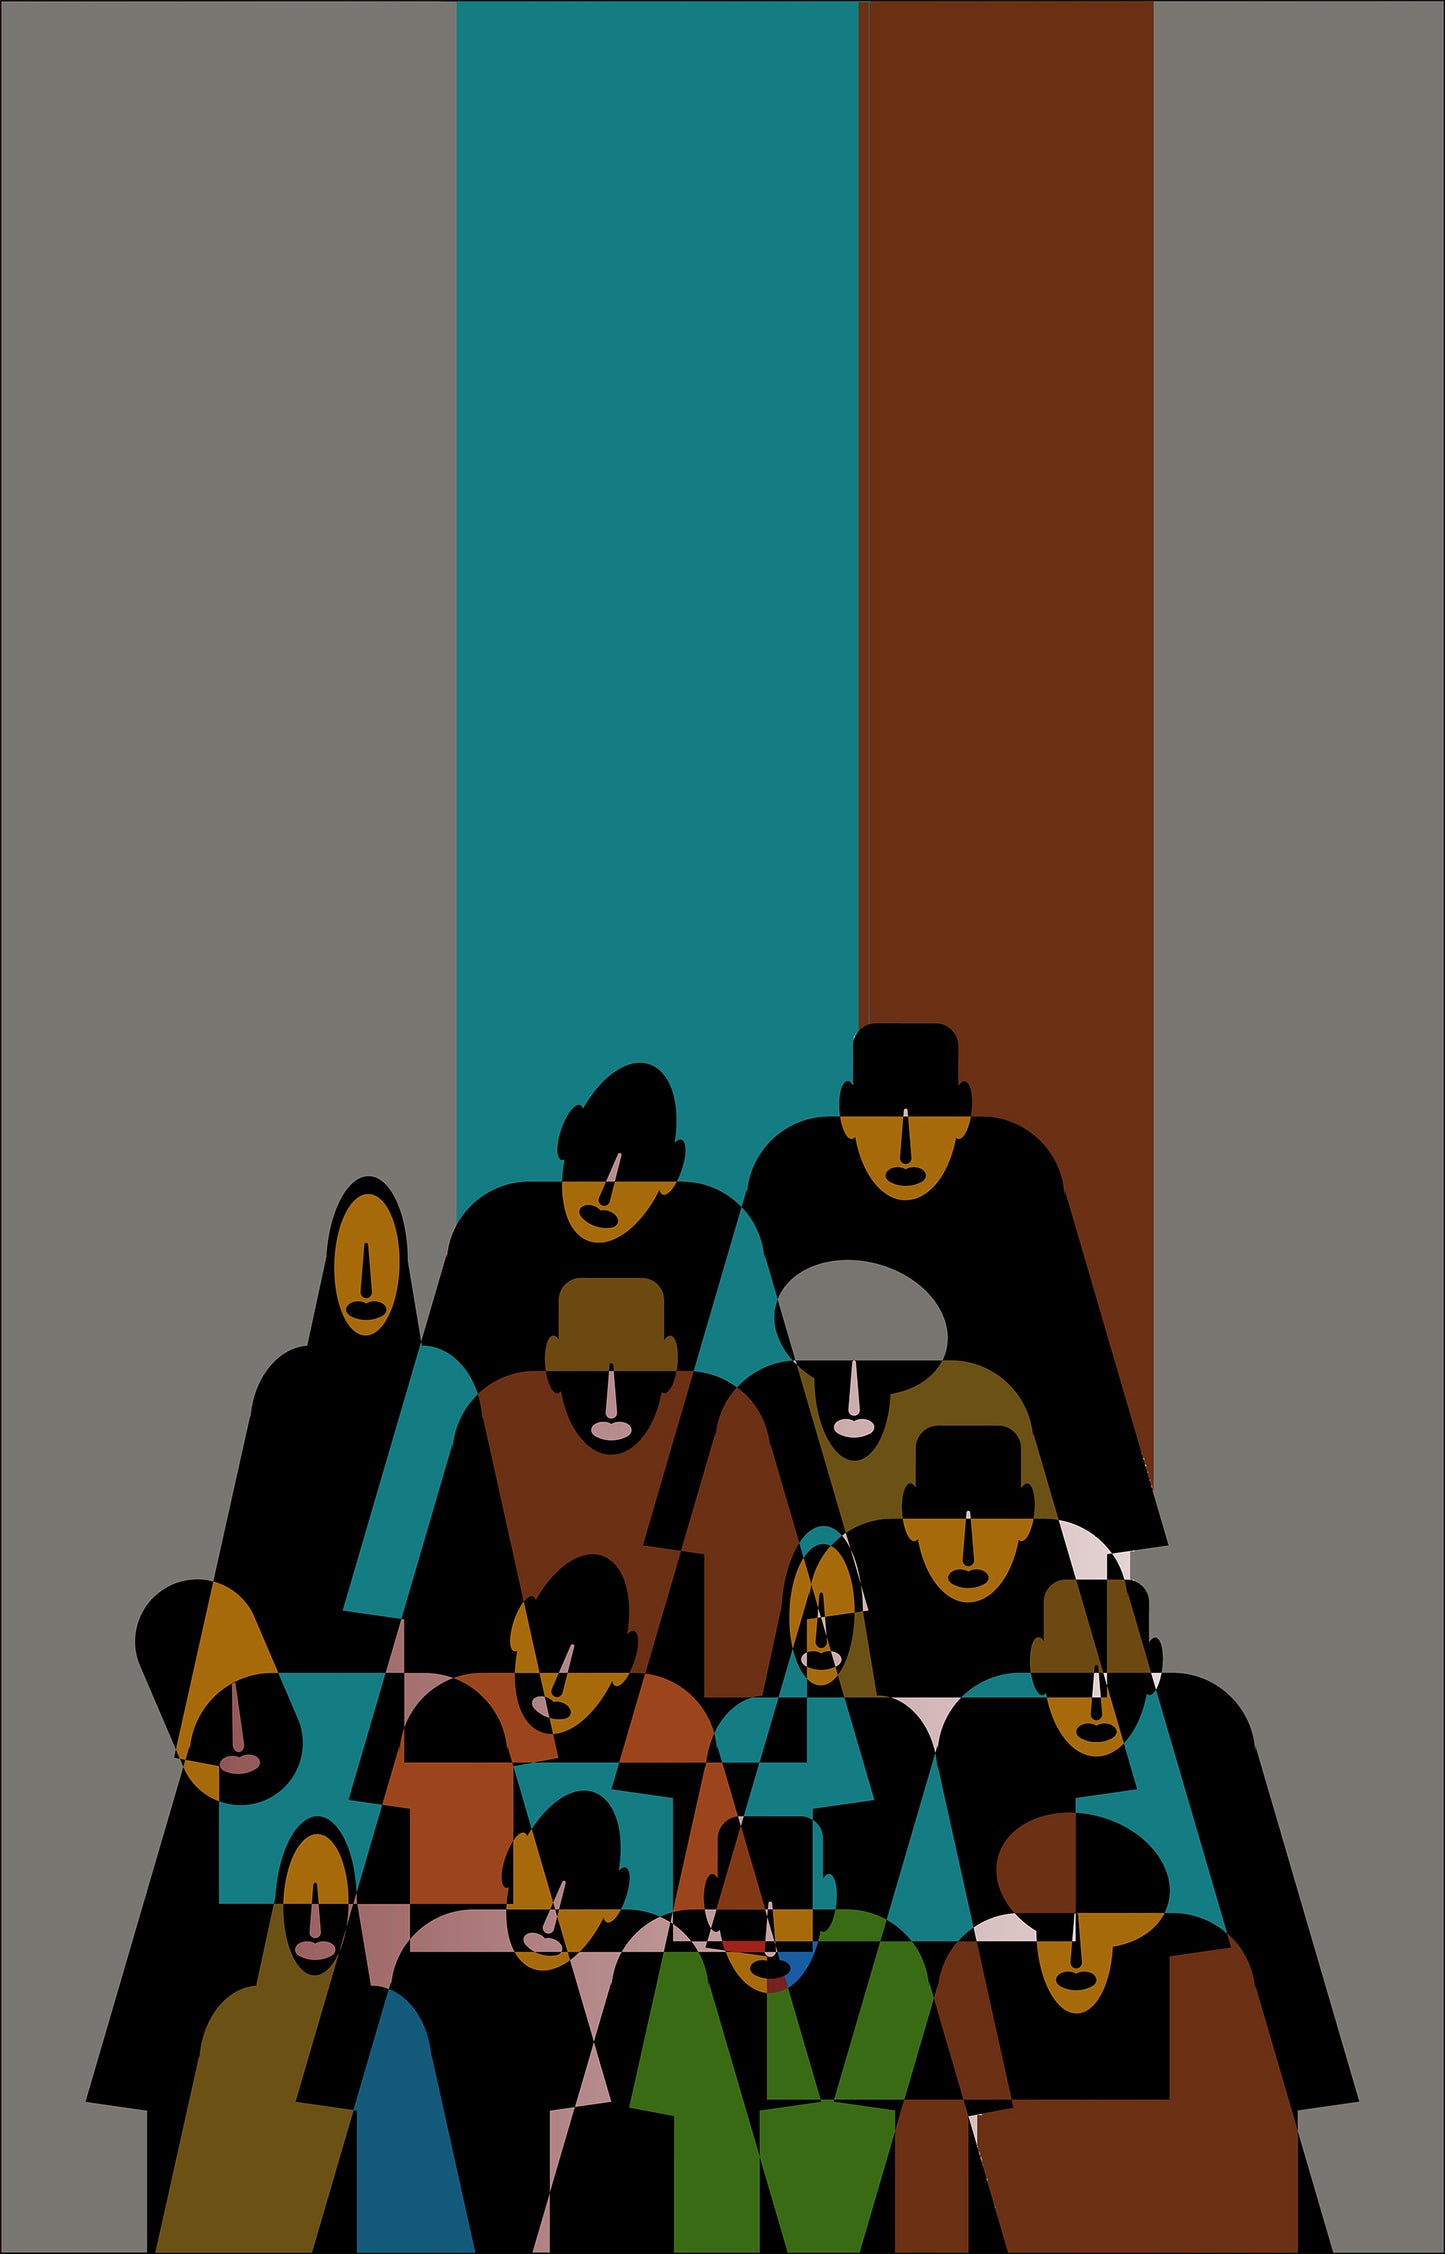 In the Crowd Limited Edition Digital art